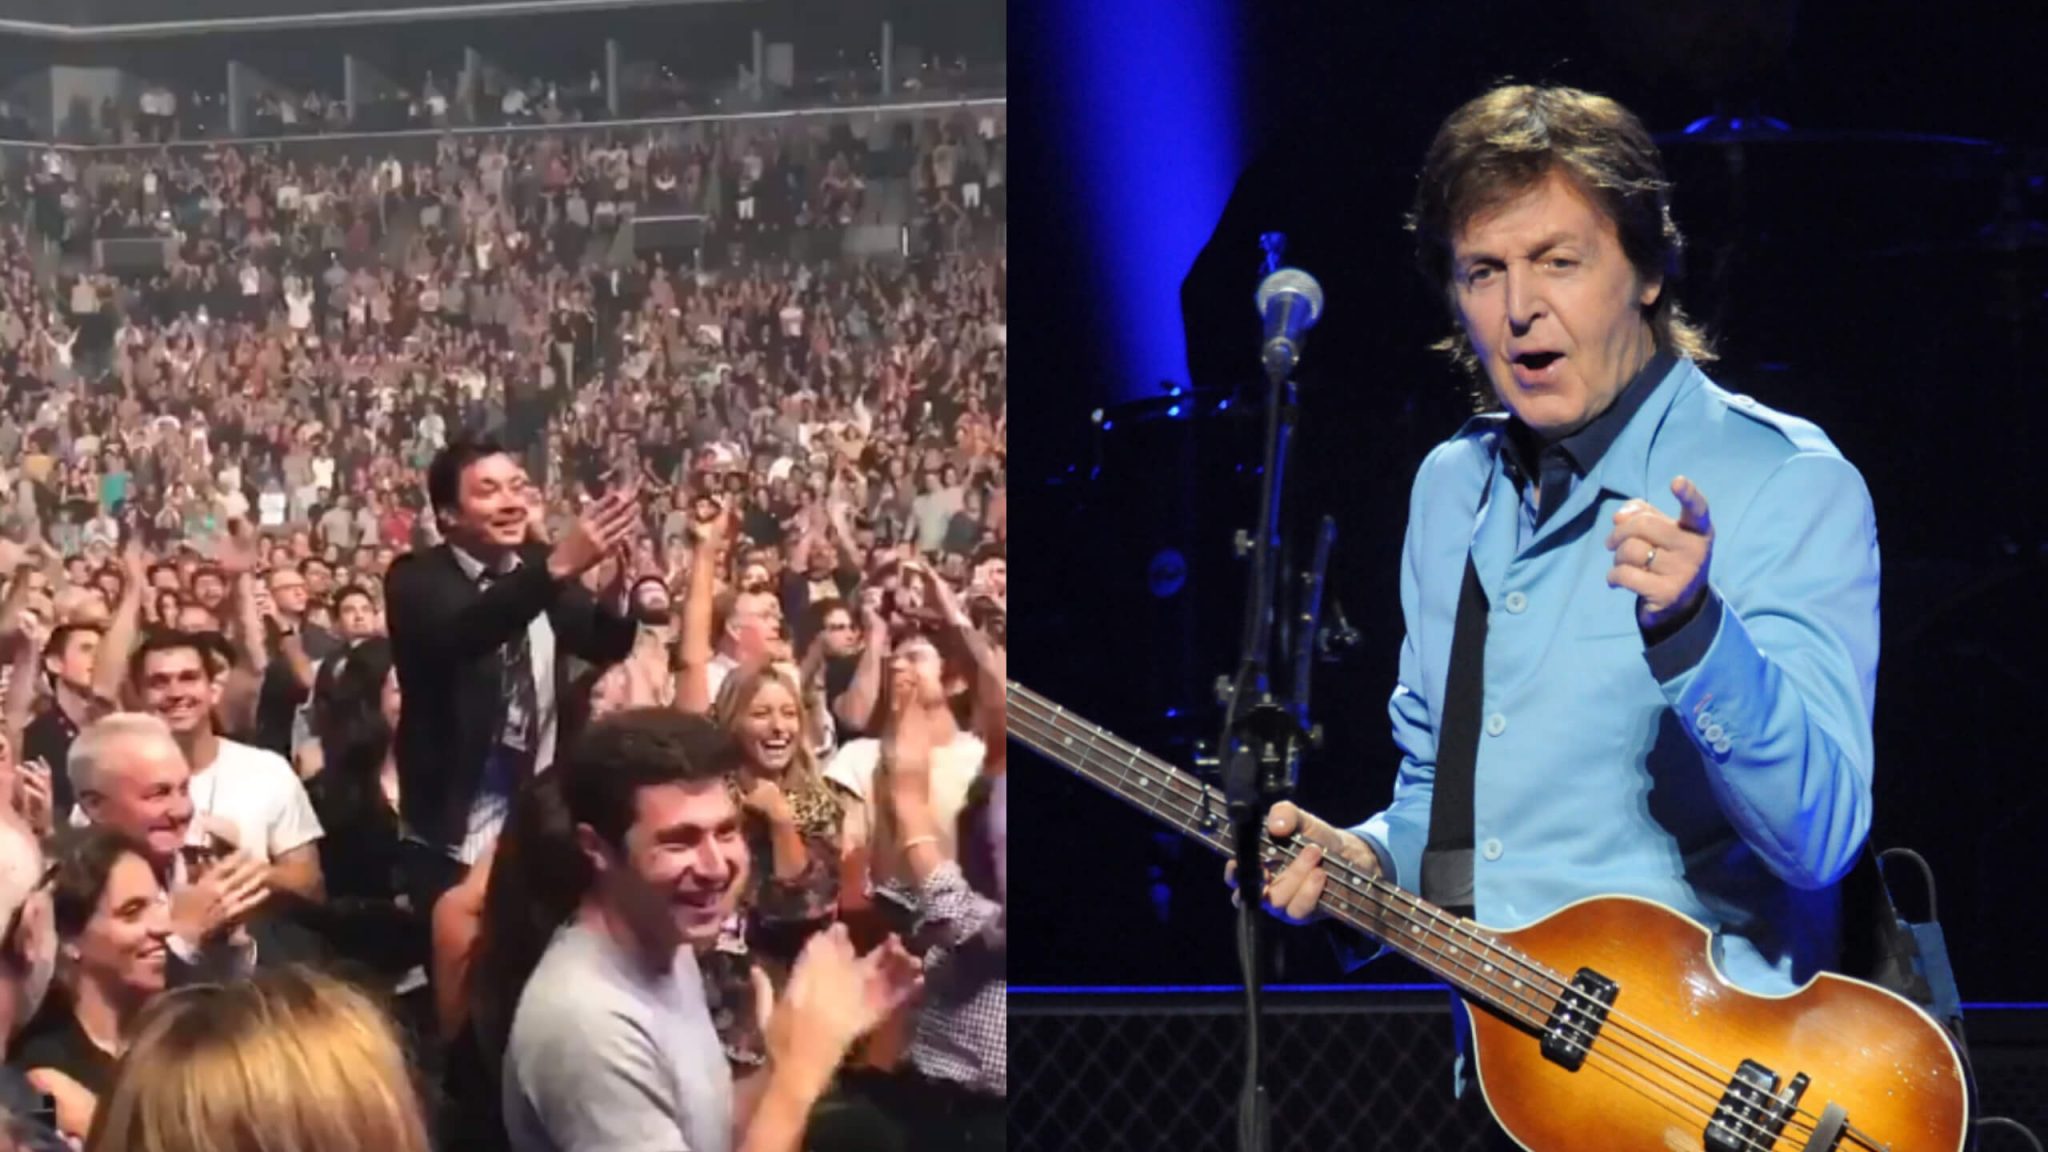 Watch Paul McCartney sing Birthday to Jimmy Fallon during concert